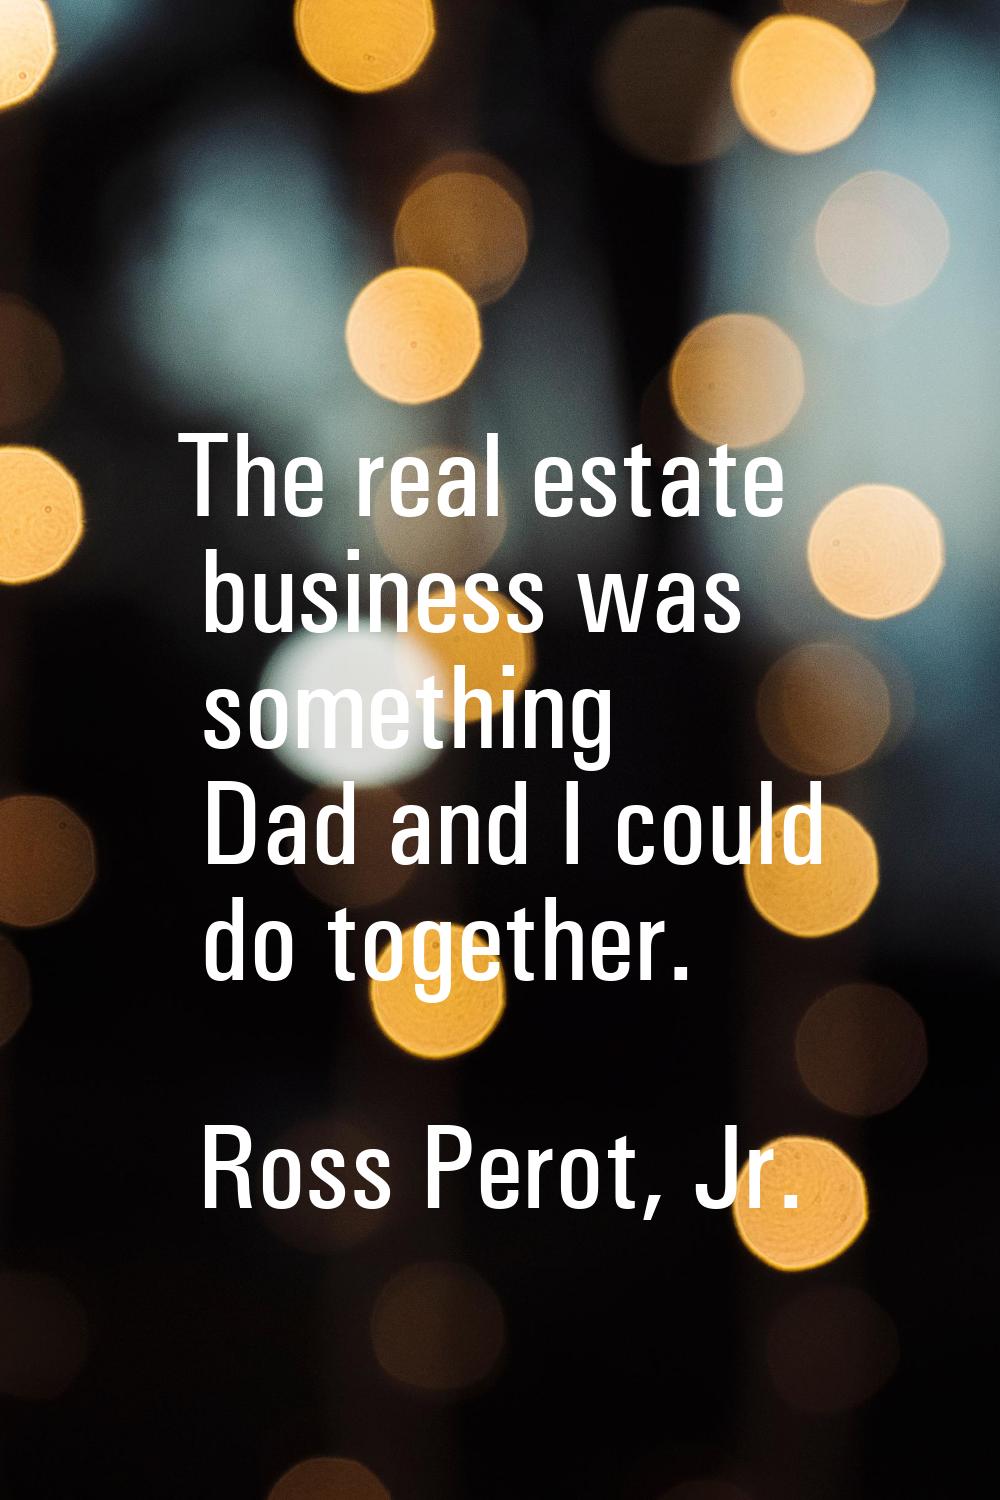 The real estate business was something Dad and I could do together.